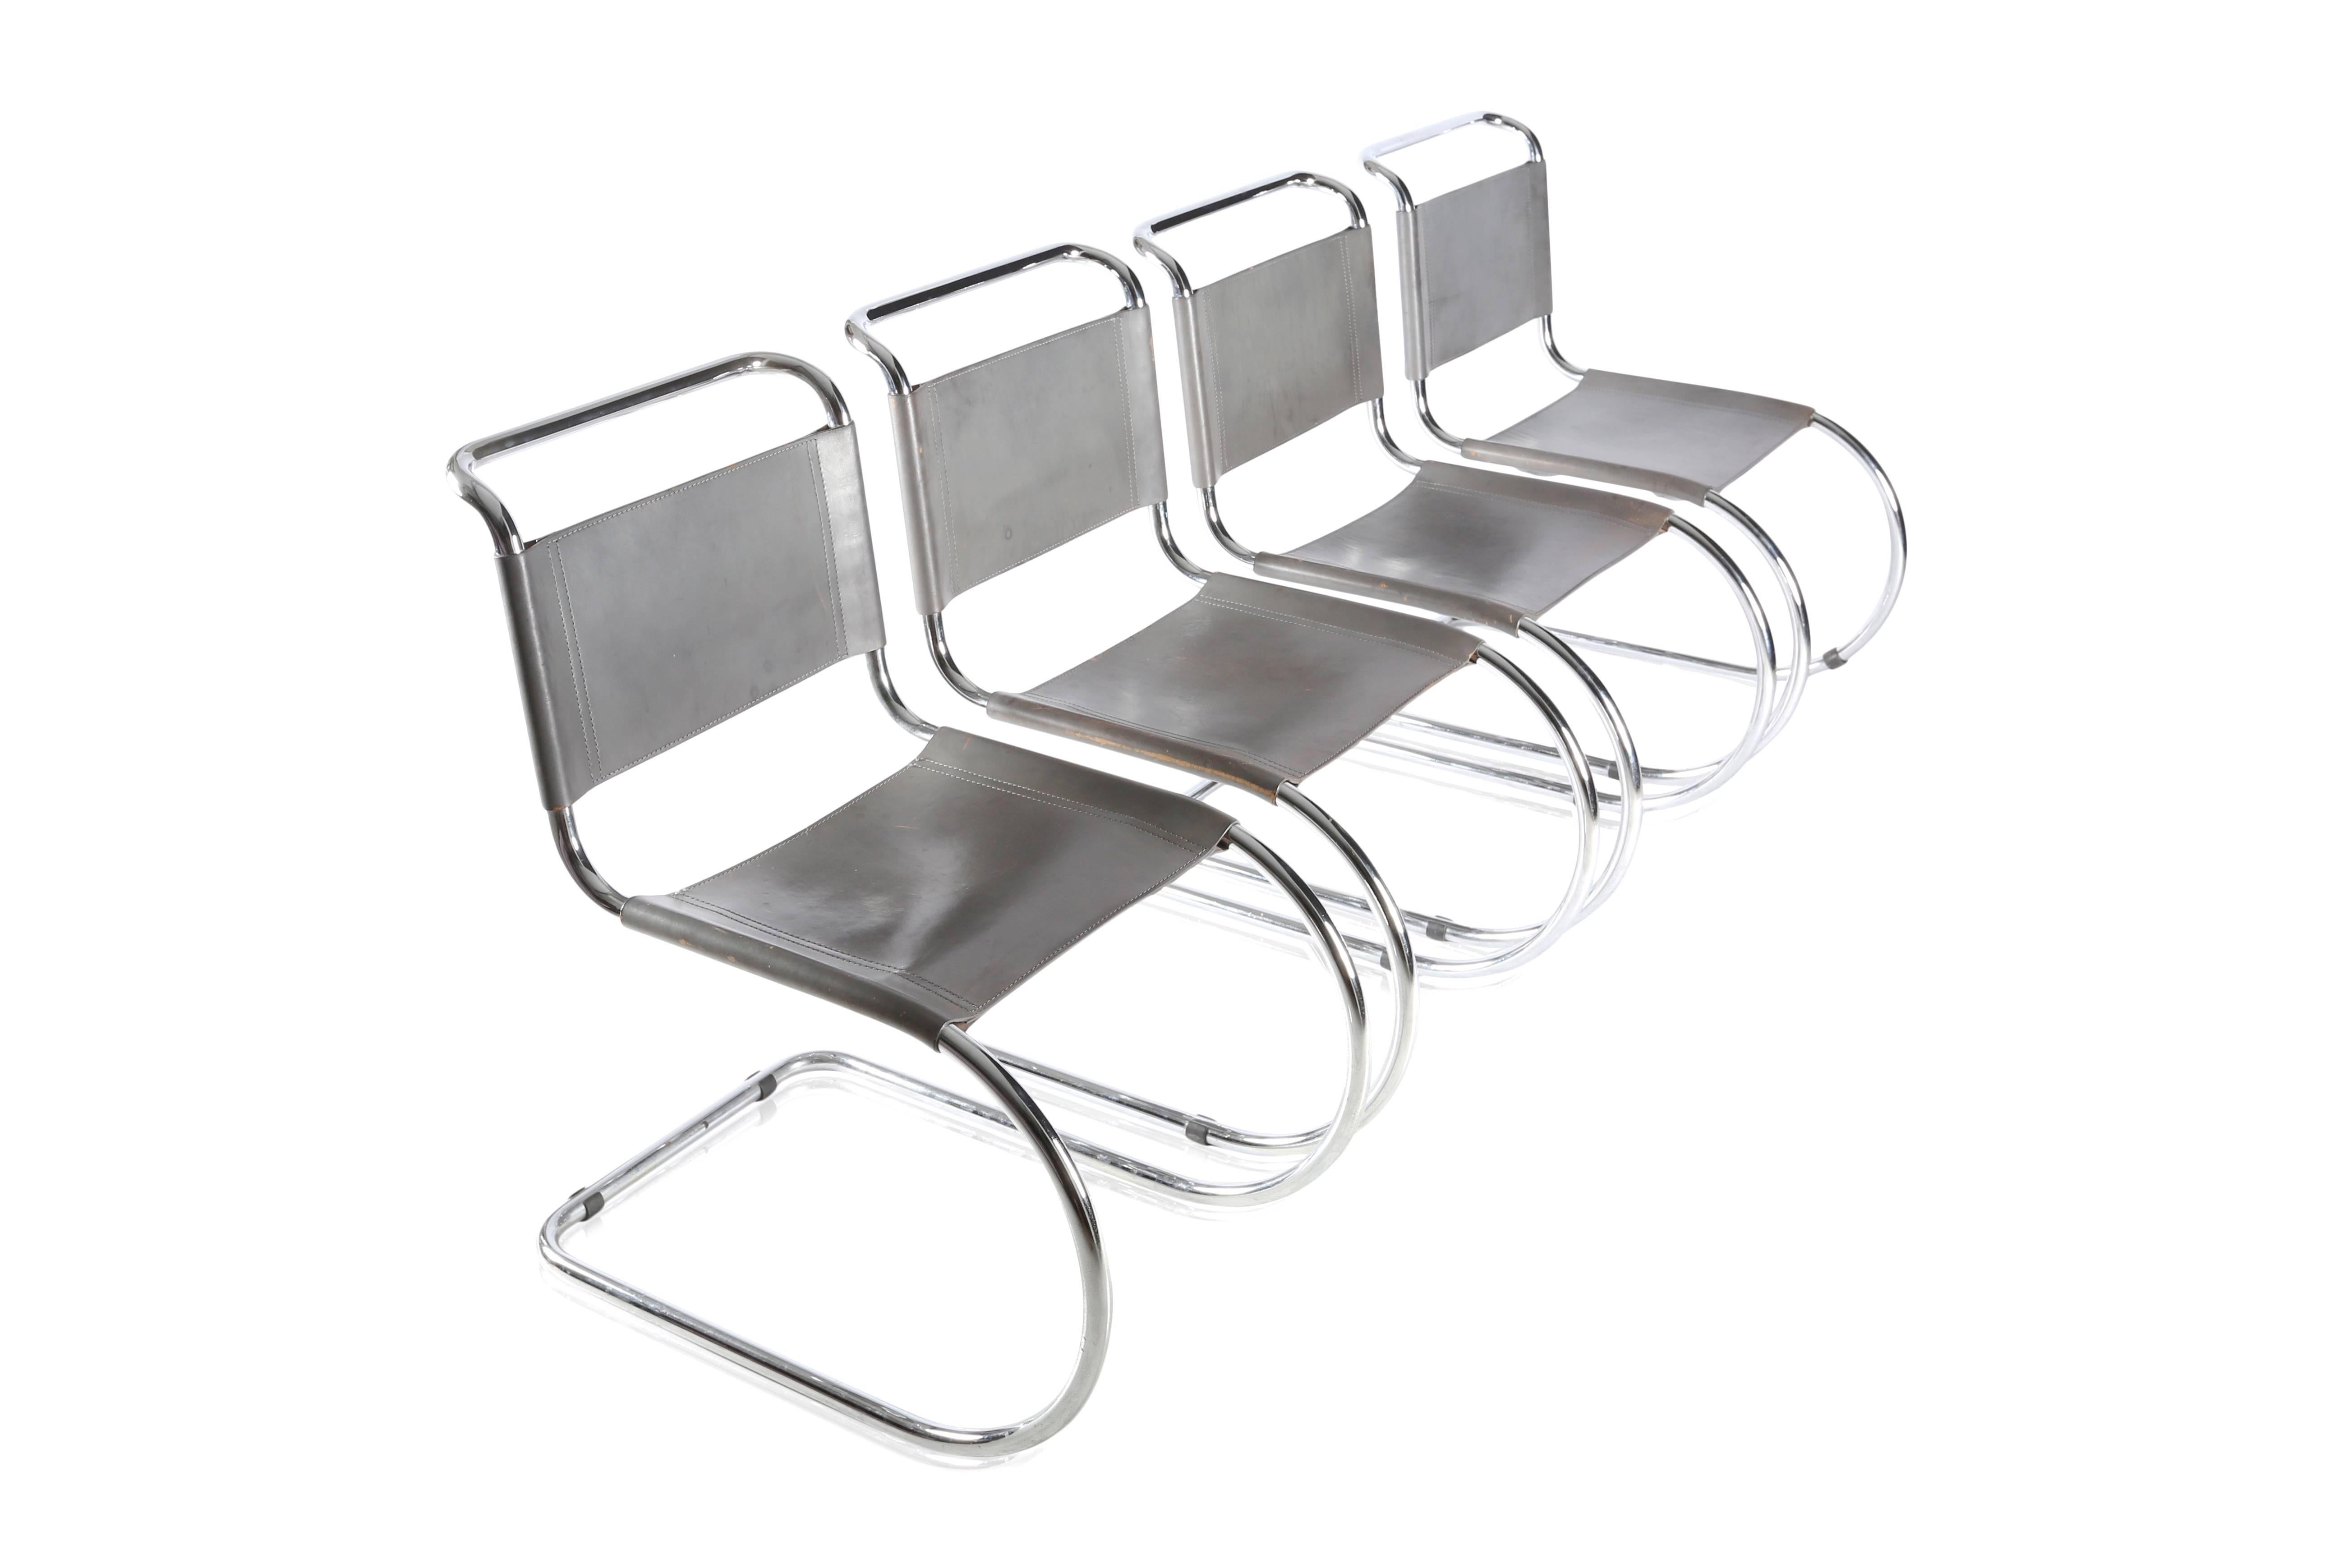 Mies van der Rohe’s MR chairs were designed in 1927 for the Weissenholf housing development project. Tubular chrome frame and grey leather.

S 533 chair, produced by Thonet.

Measures: H 80 cm D 70 cm B 50 cm SH 40 cm.